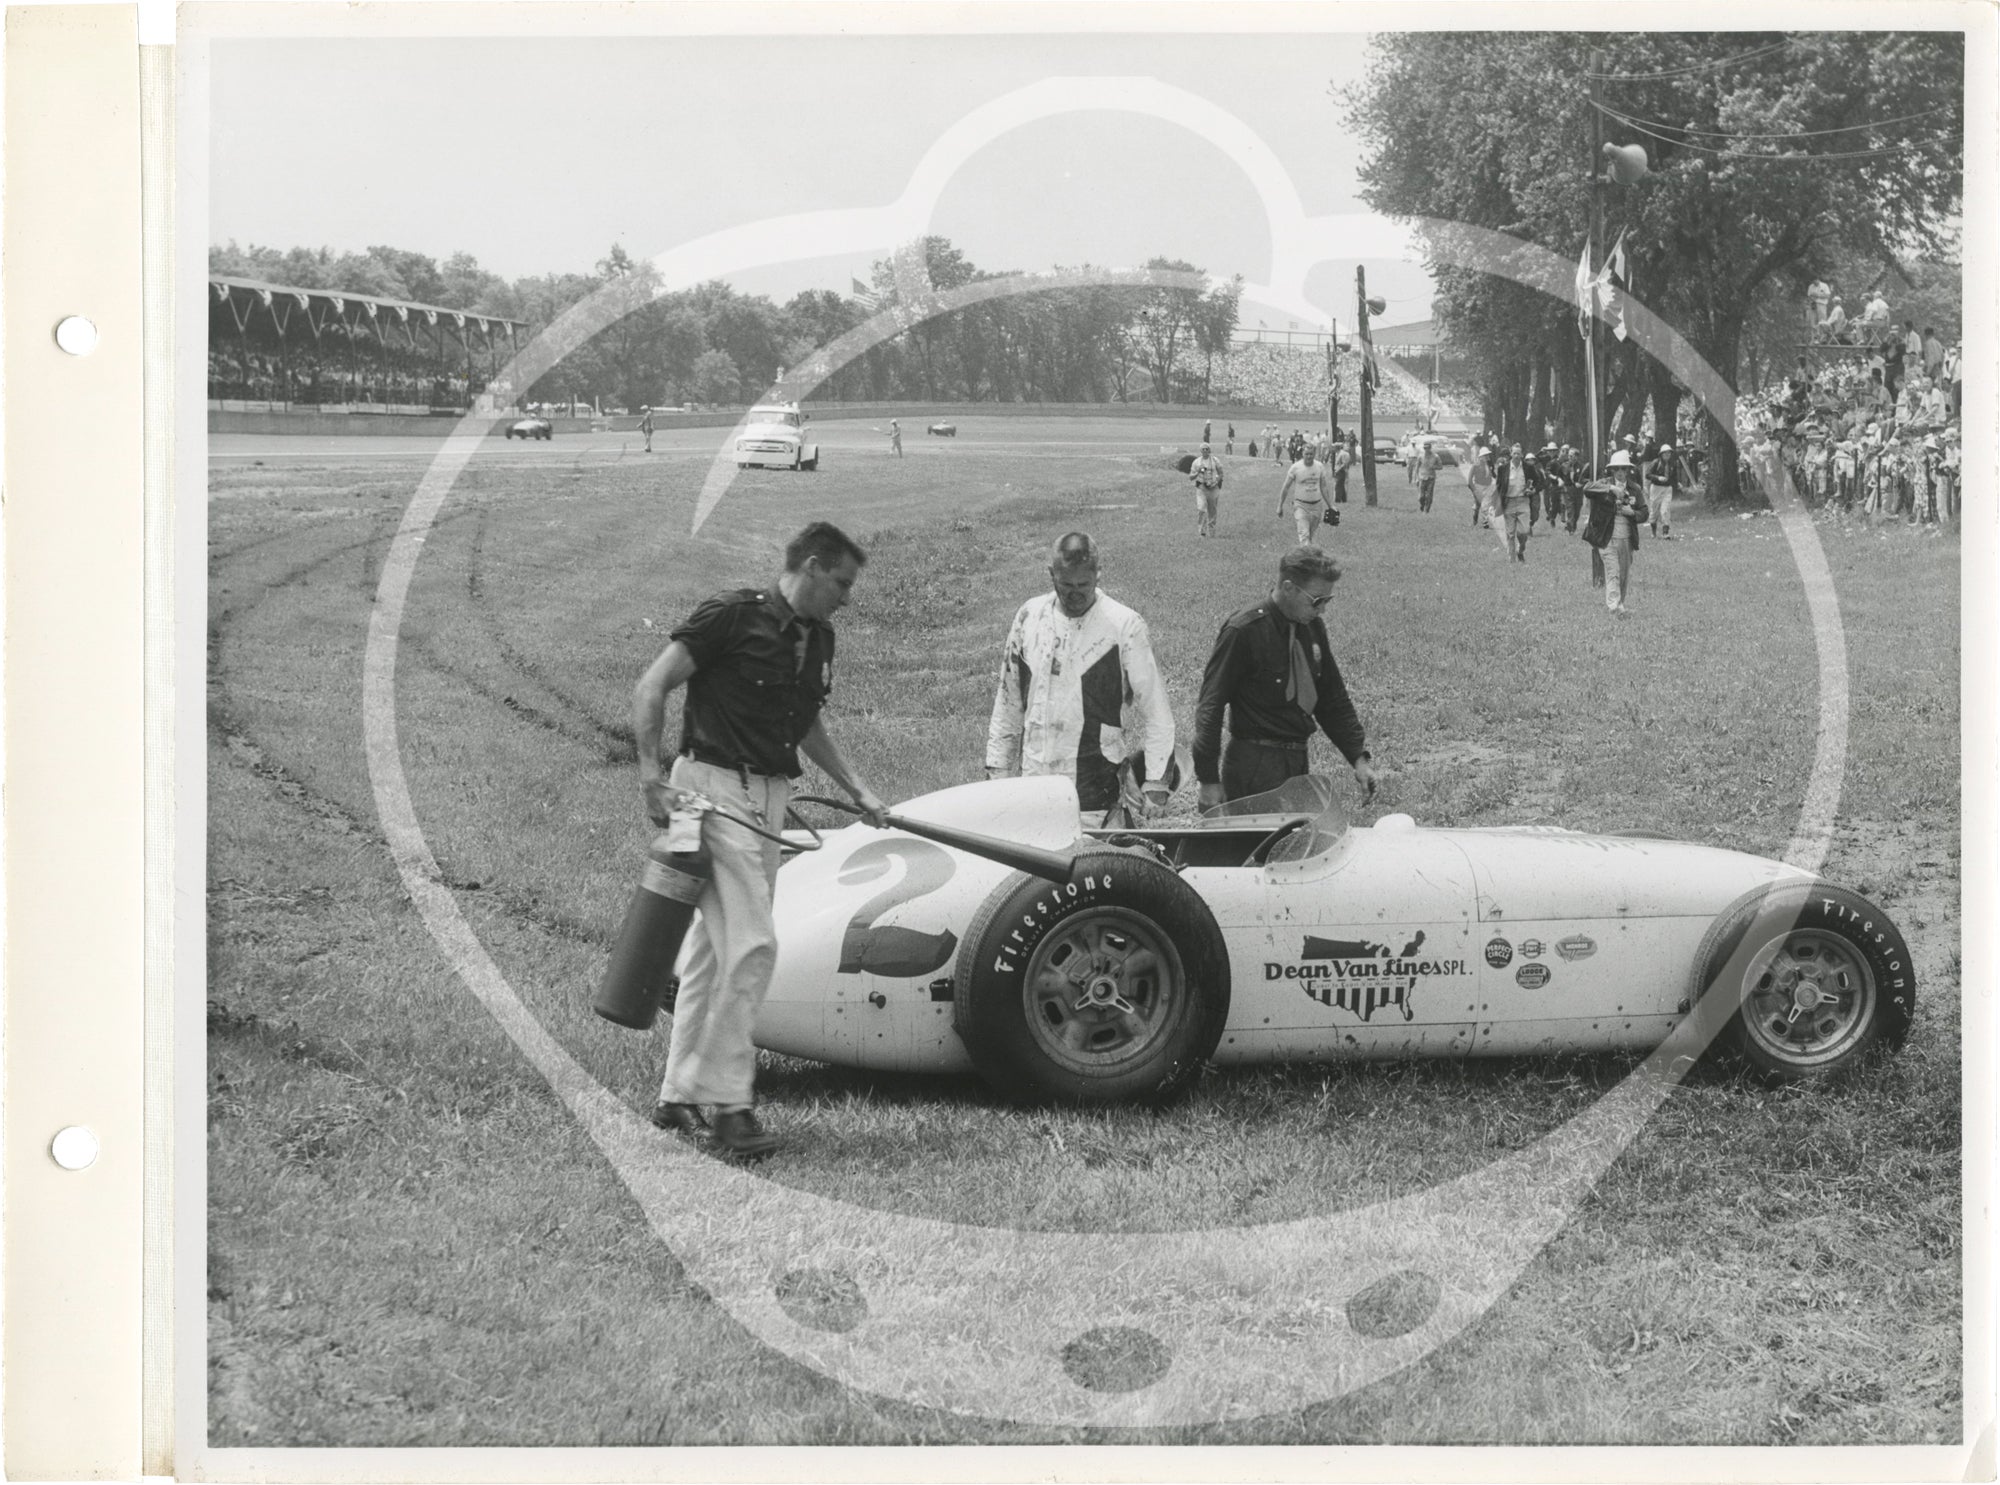 Archive of two photo albums documenting Dean Van Lines racing team at ...